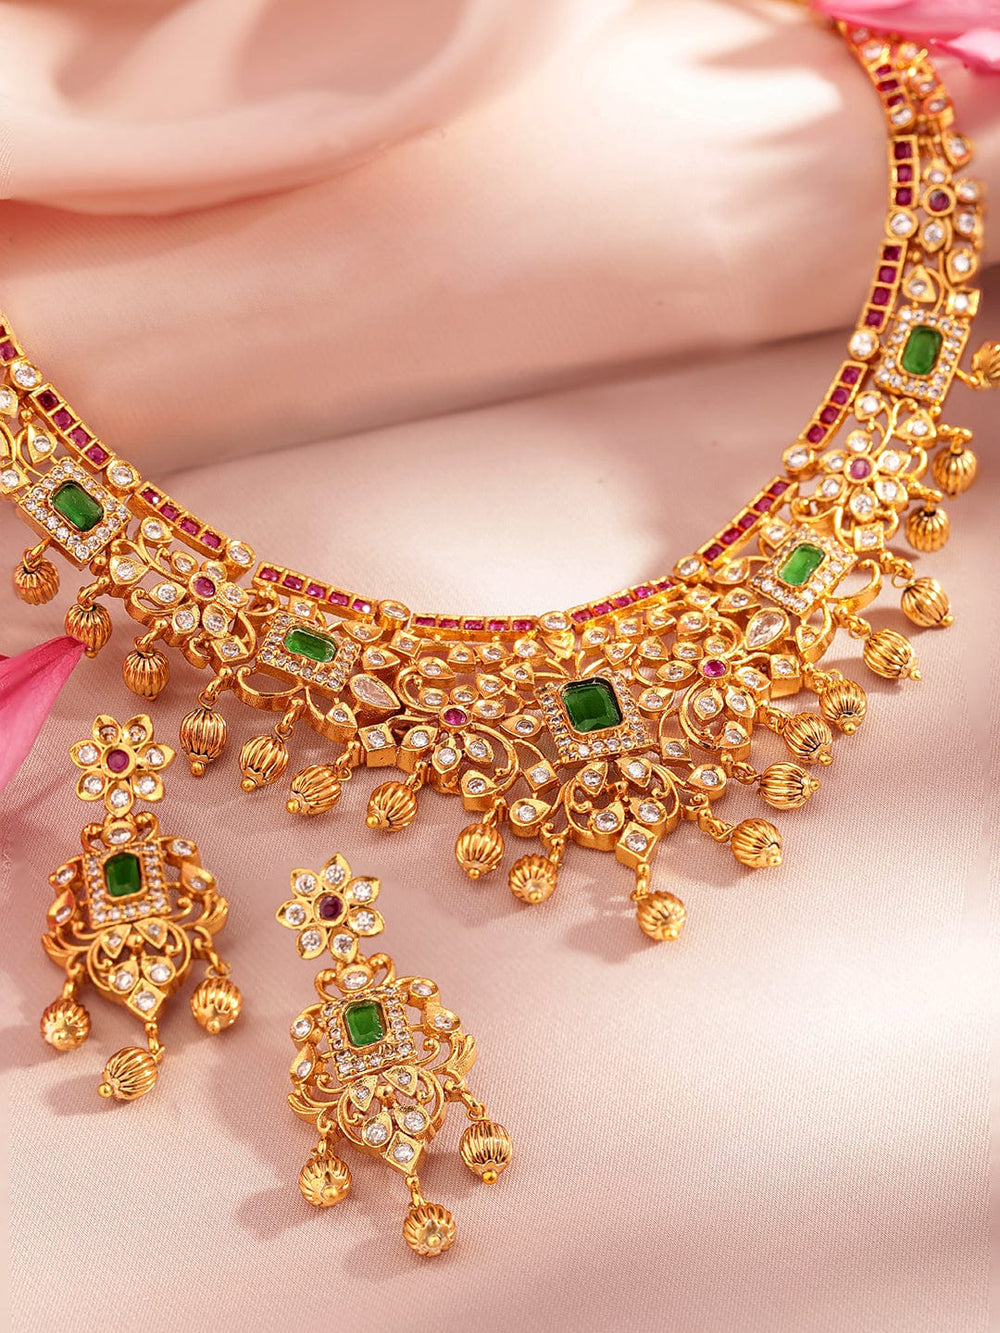 Rubans Women's 22K Gold-Plated Faux Ruby & Emerald Studded Beaded Jewellery Set Necklace and Earrings